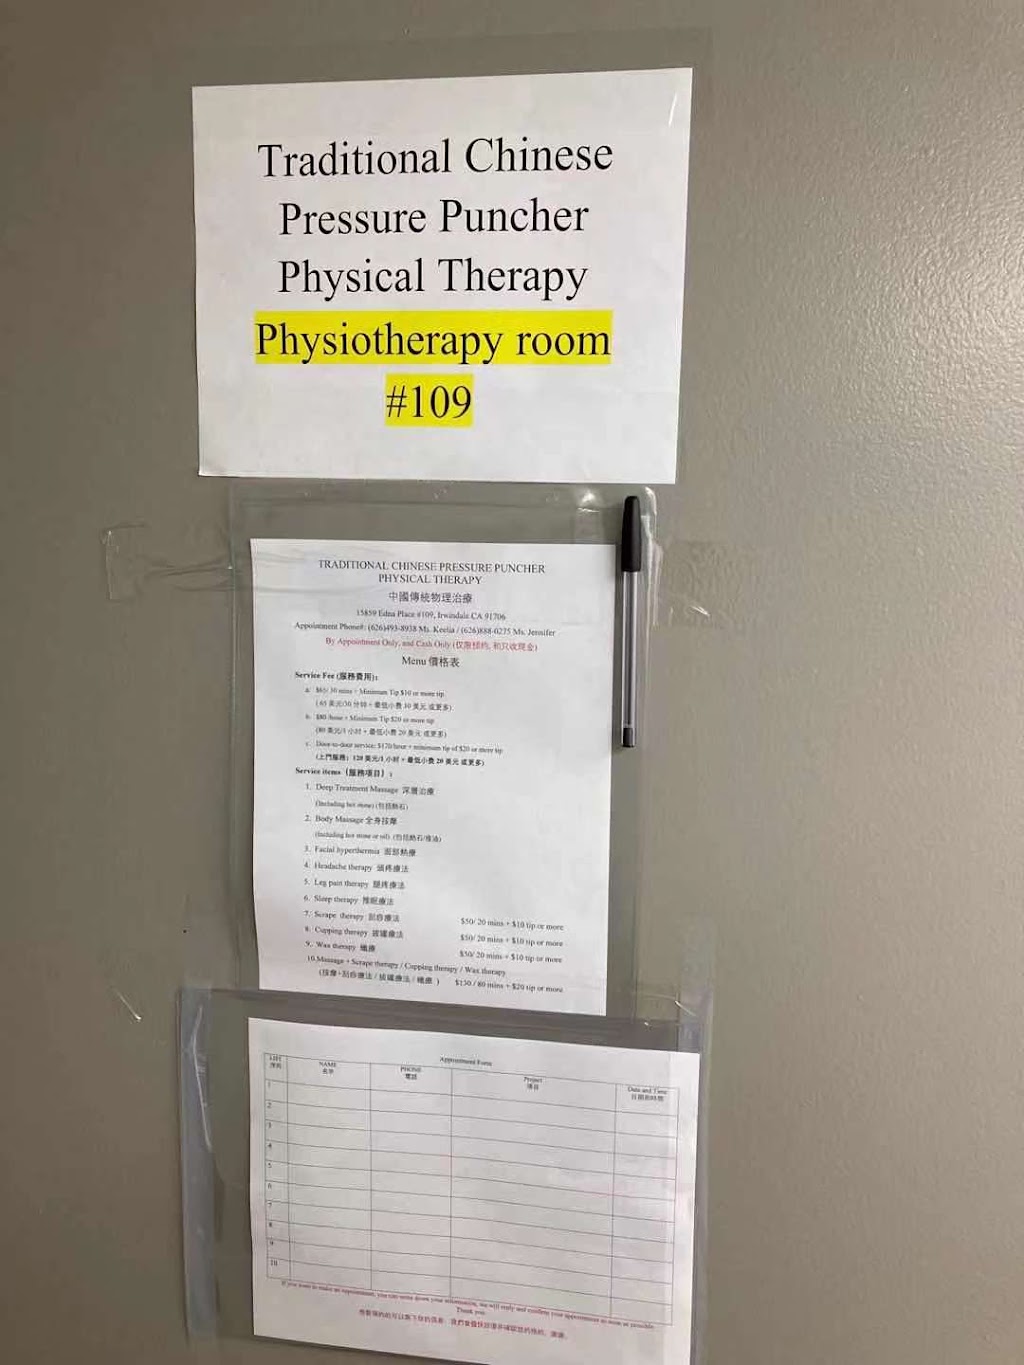 Traditional Chinese Pressure Puncher Physical Therapy | 15859 Edna Pl Suite # 109, Irwindale, CA 91706, USA | Phone: (626) 703-2150